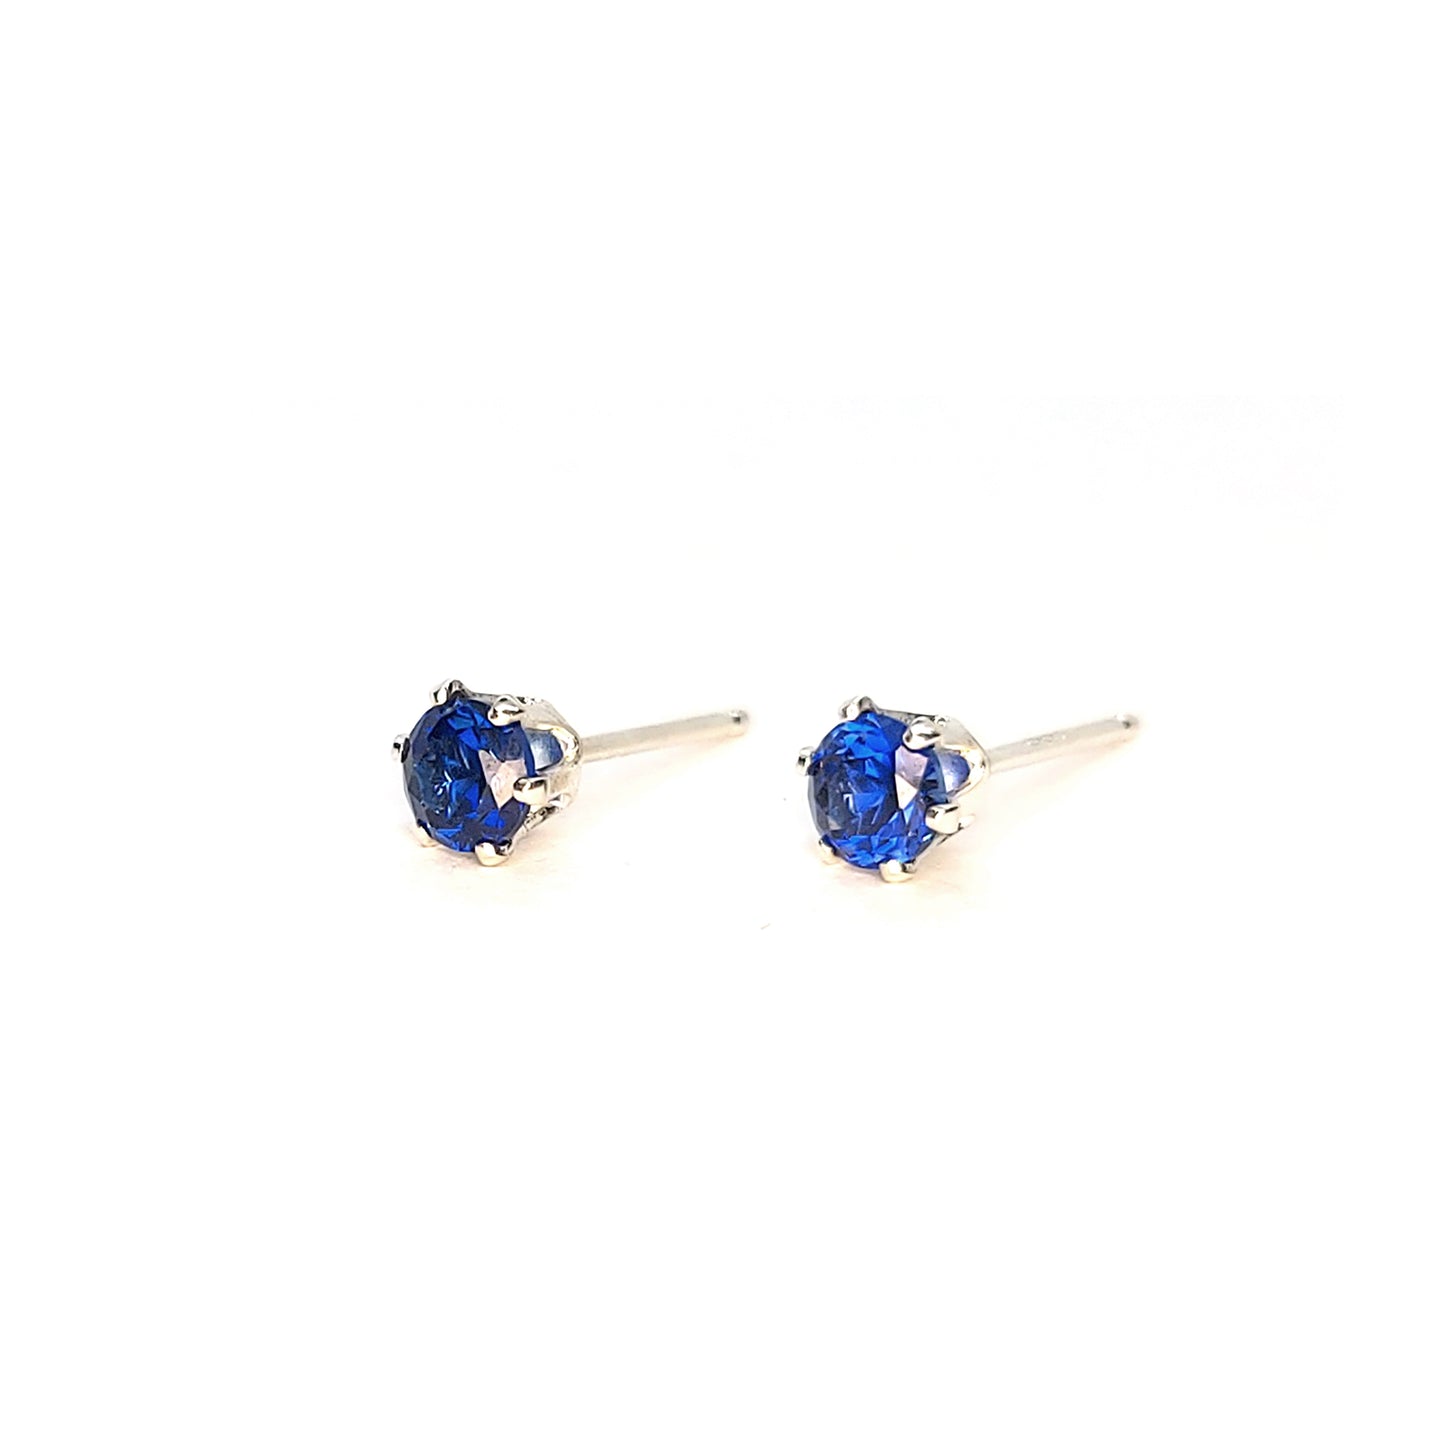 Silver 6 claw stud earrings set with dark blue sapphires. 4mm